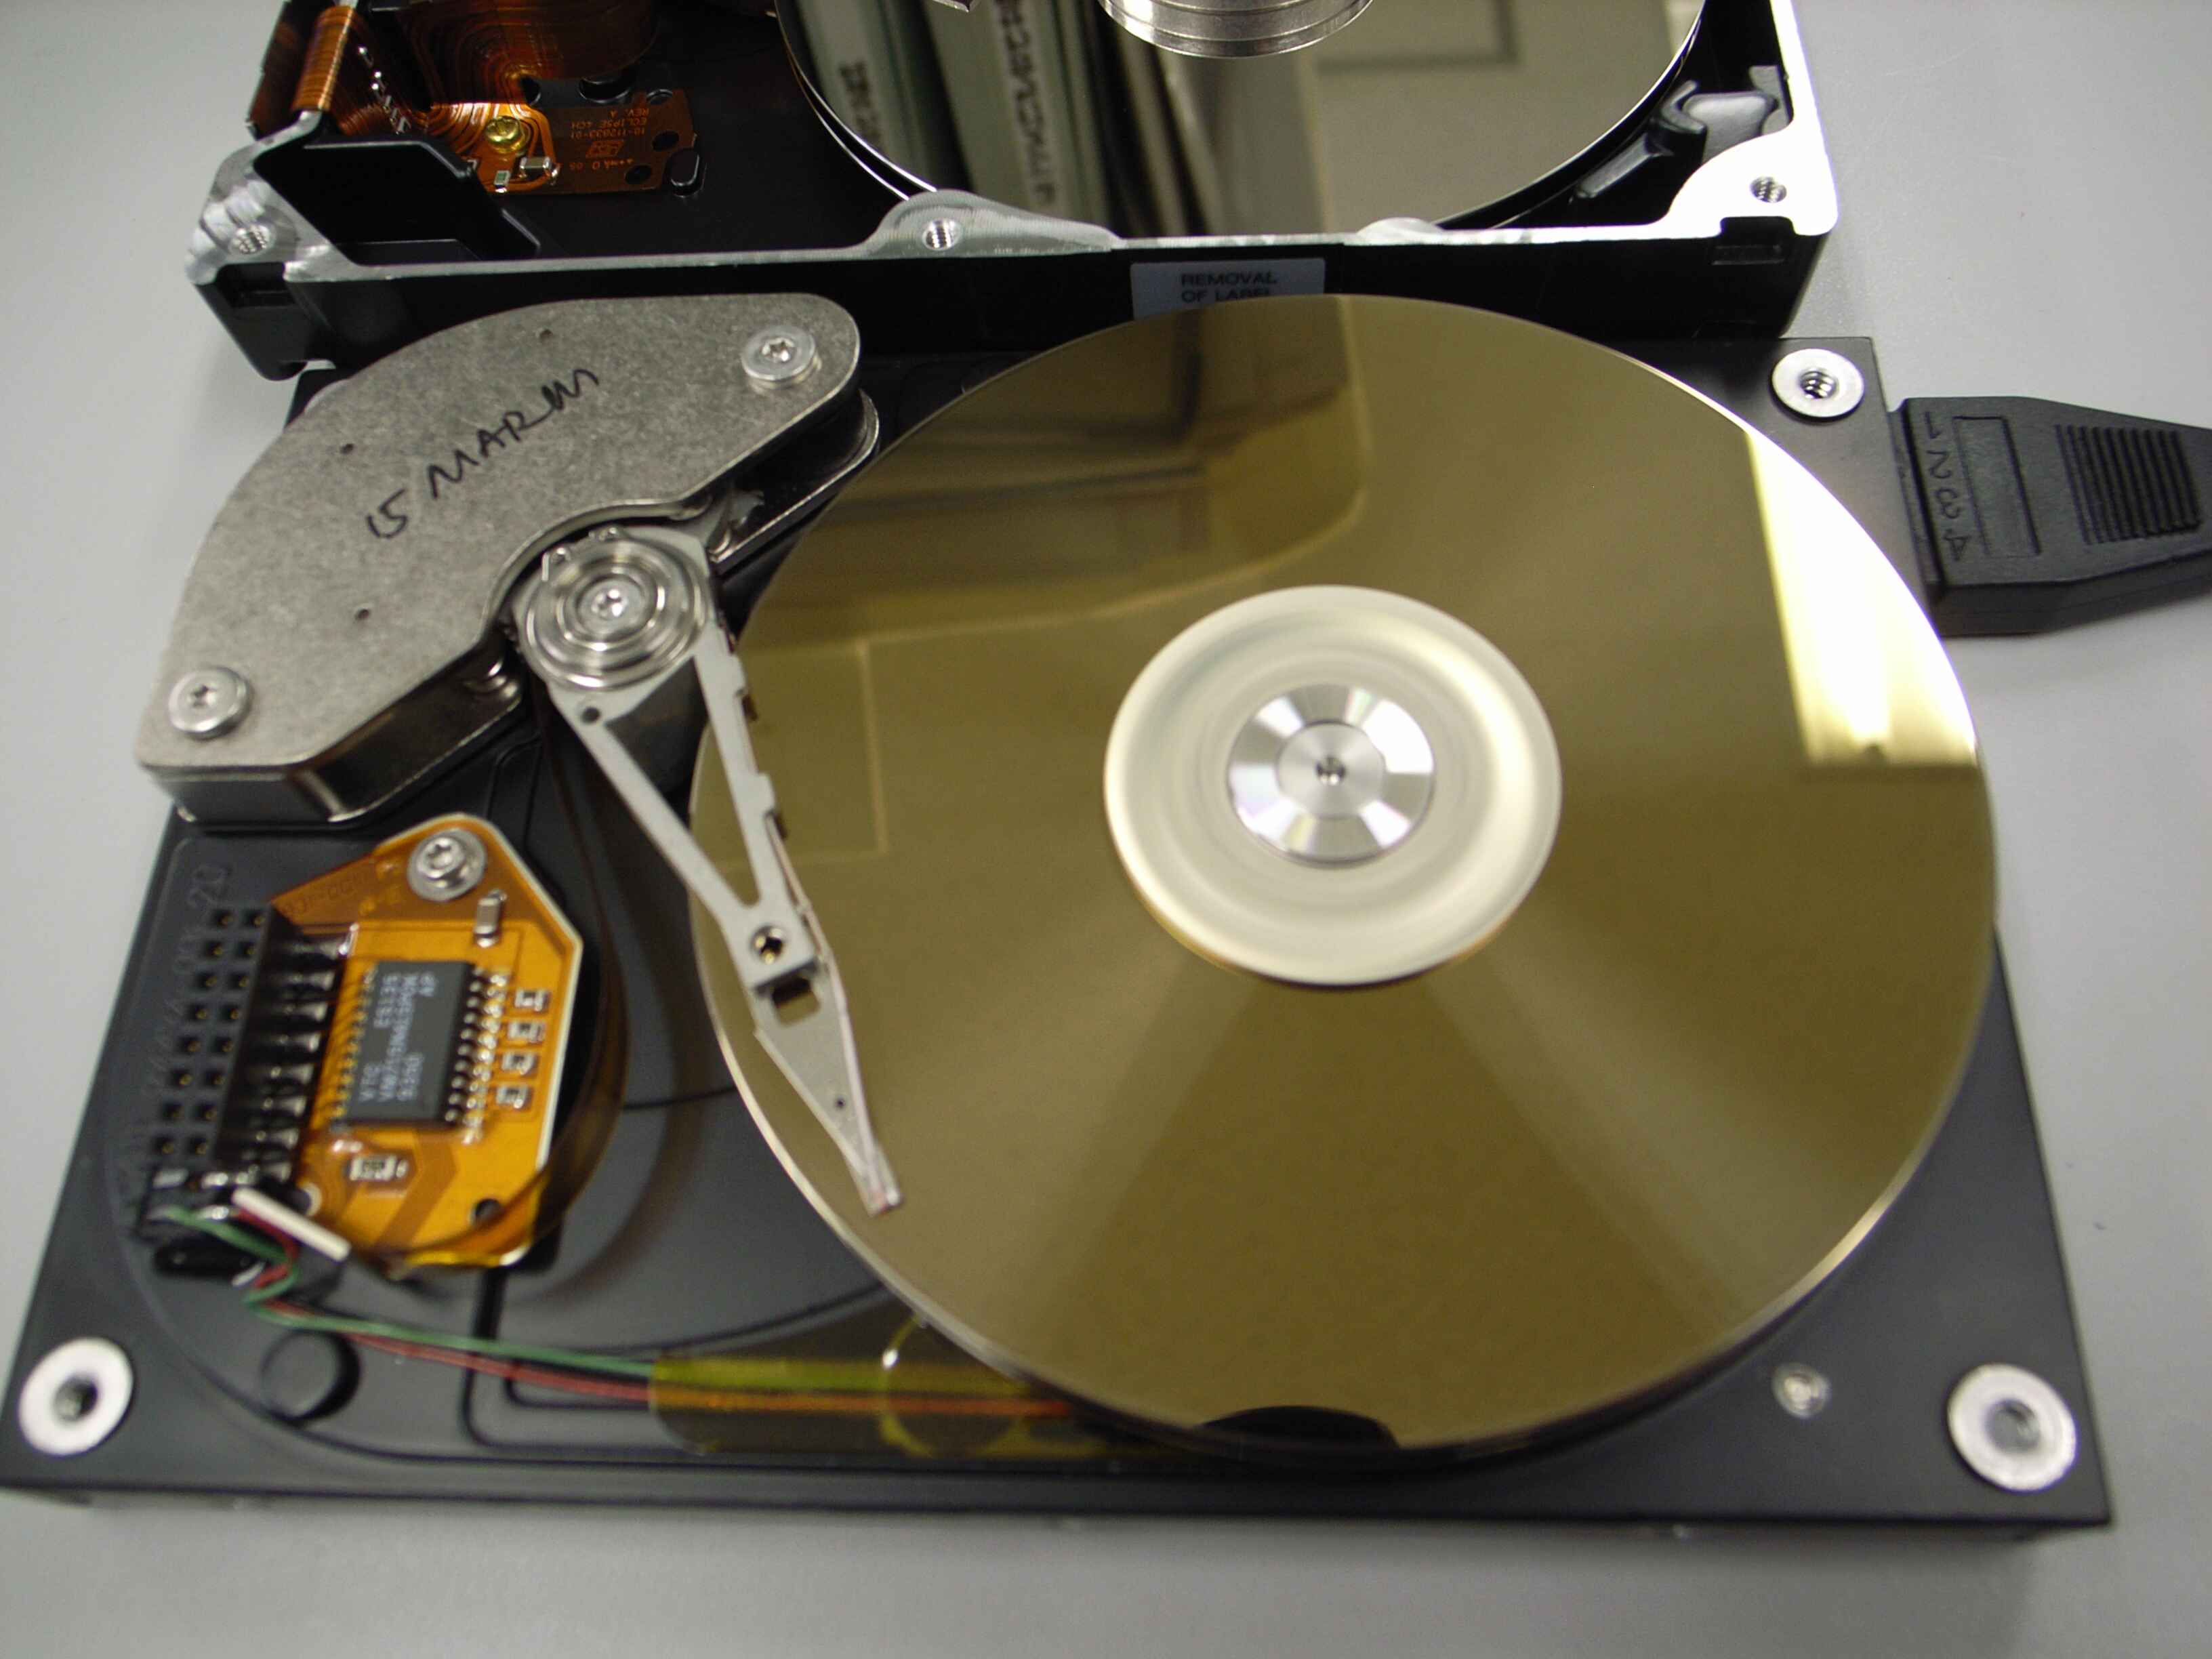 what-are-the-platters-of-the-hard-disk-drive-made-of